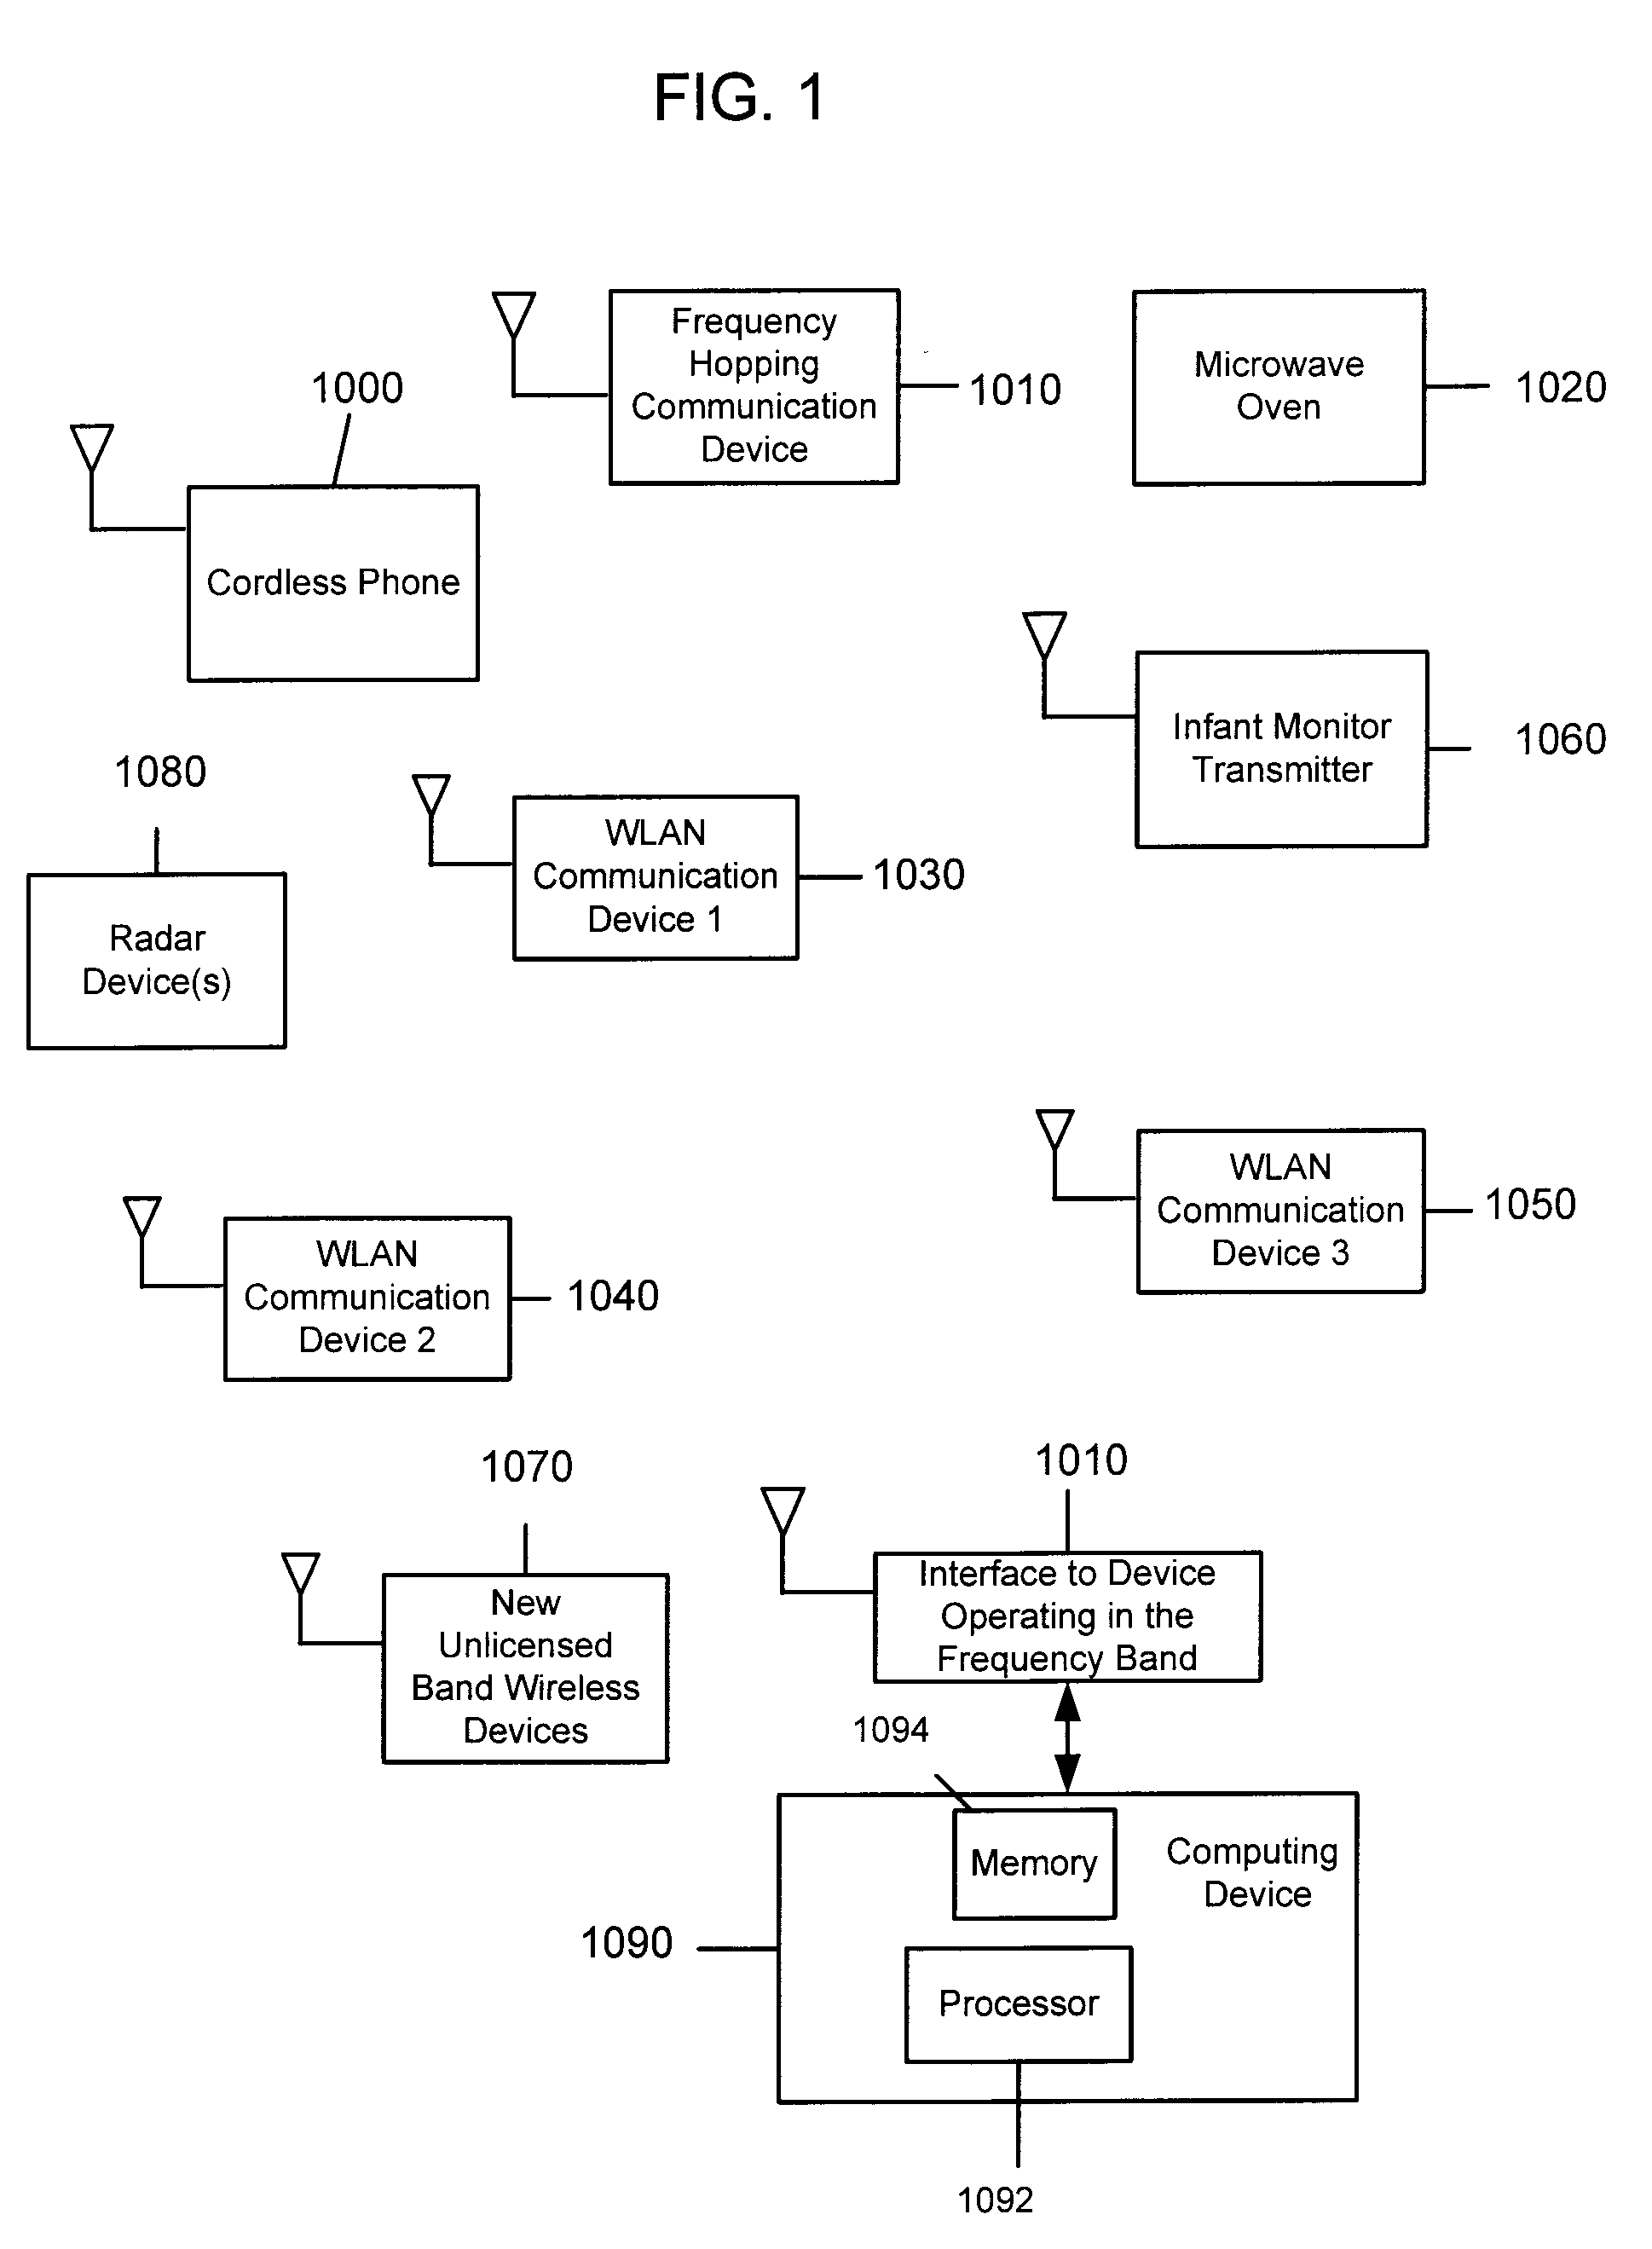 System and Method for Spectrum Management of a Shared Frequency Band